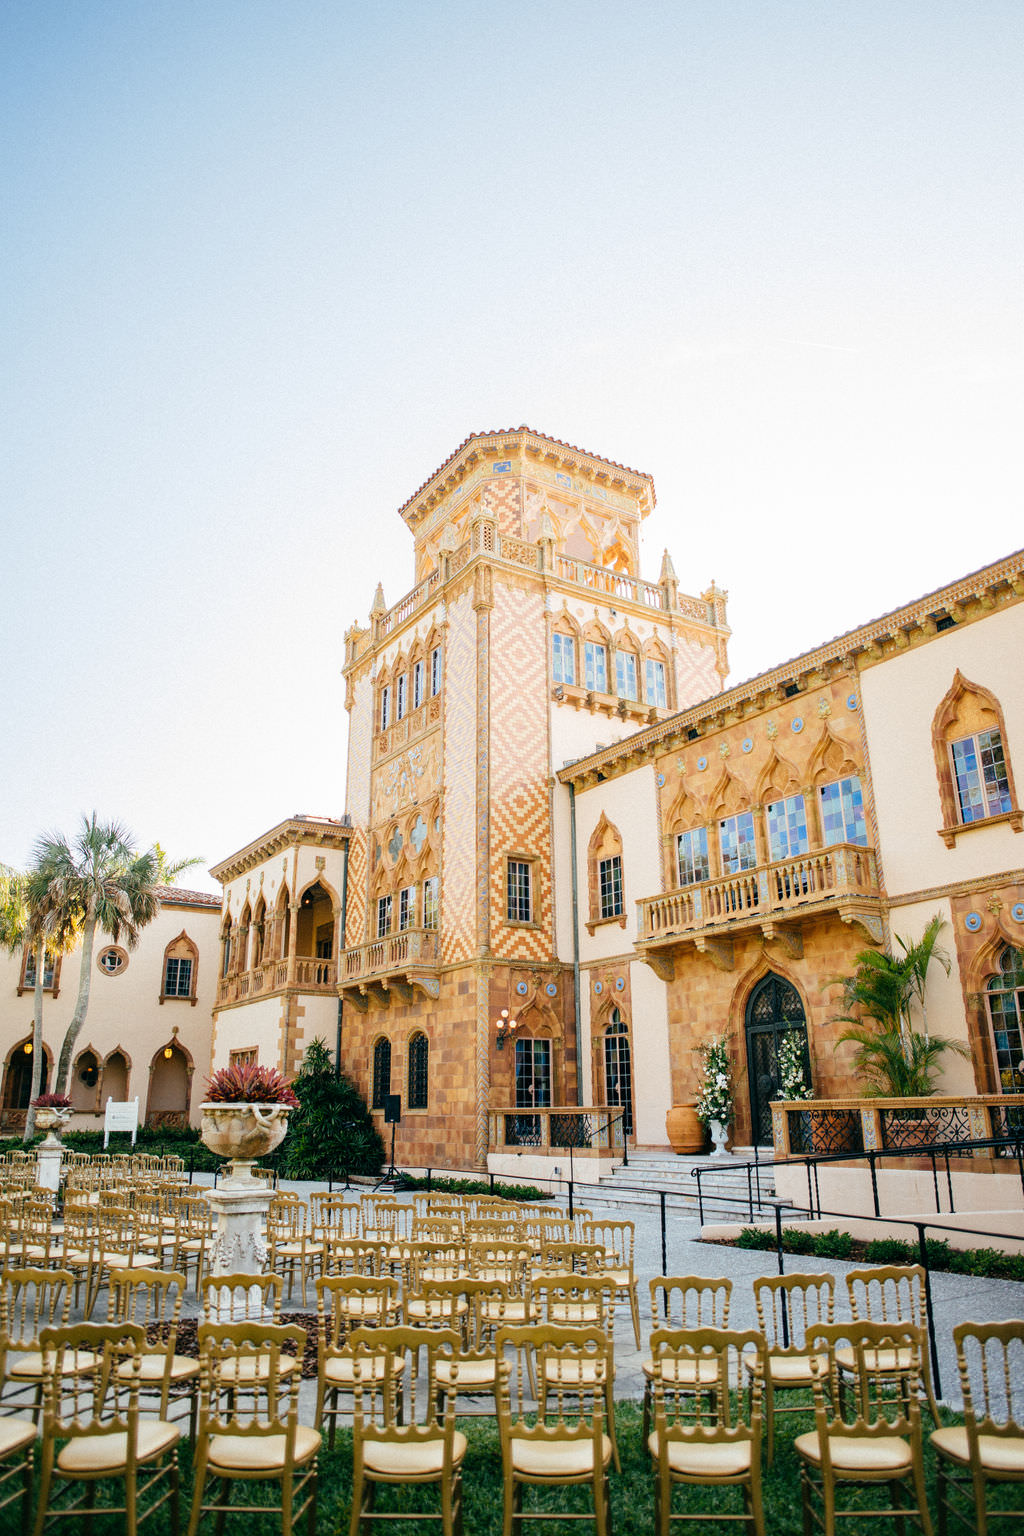 Sarasota Wedding Ceremony | Historic Sarasota Waterfront Wedding Ceremony at Venue Ca d’Zan at The Ringling Museum | Tampa Bay Wedding Planner NK Productions